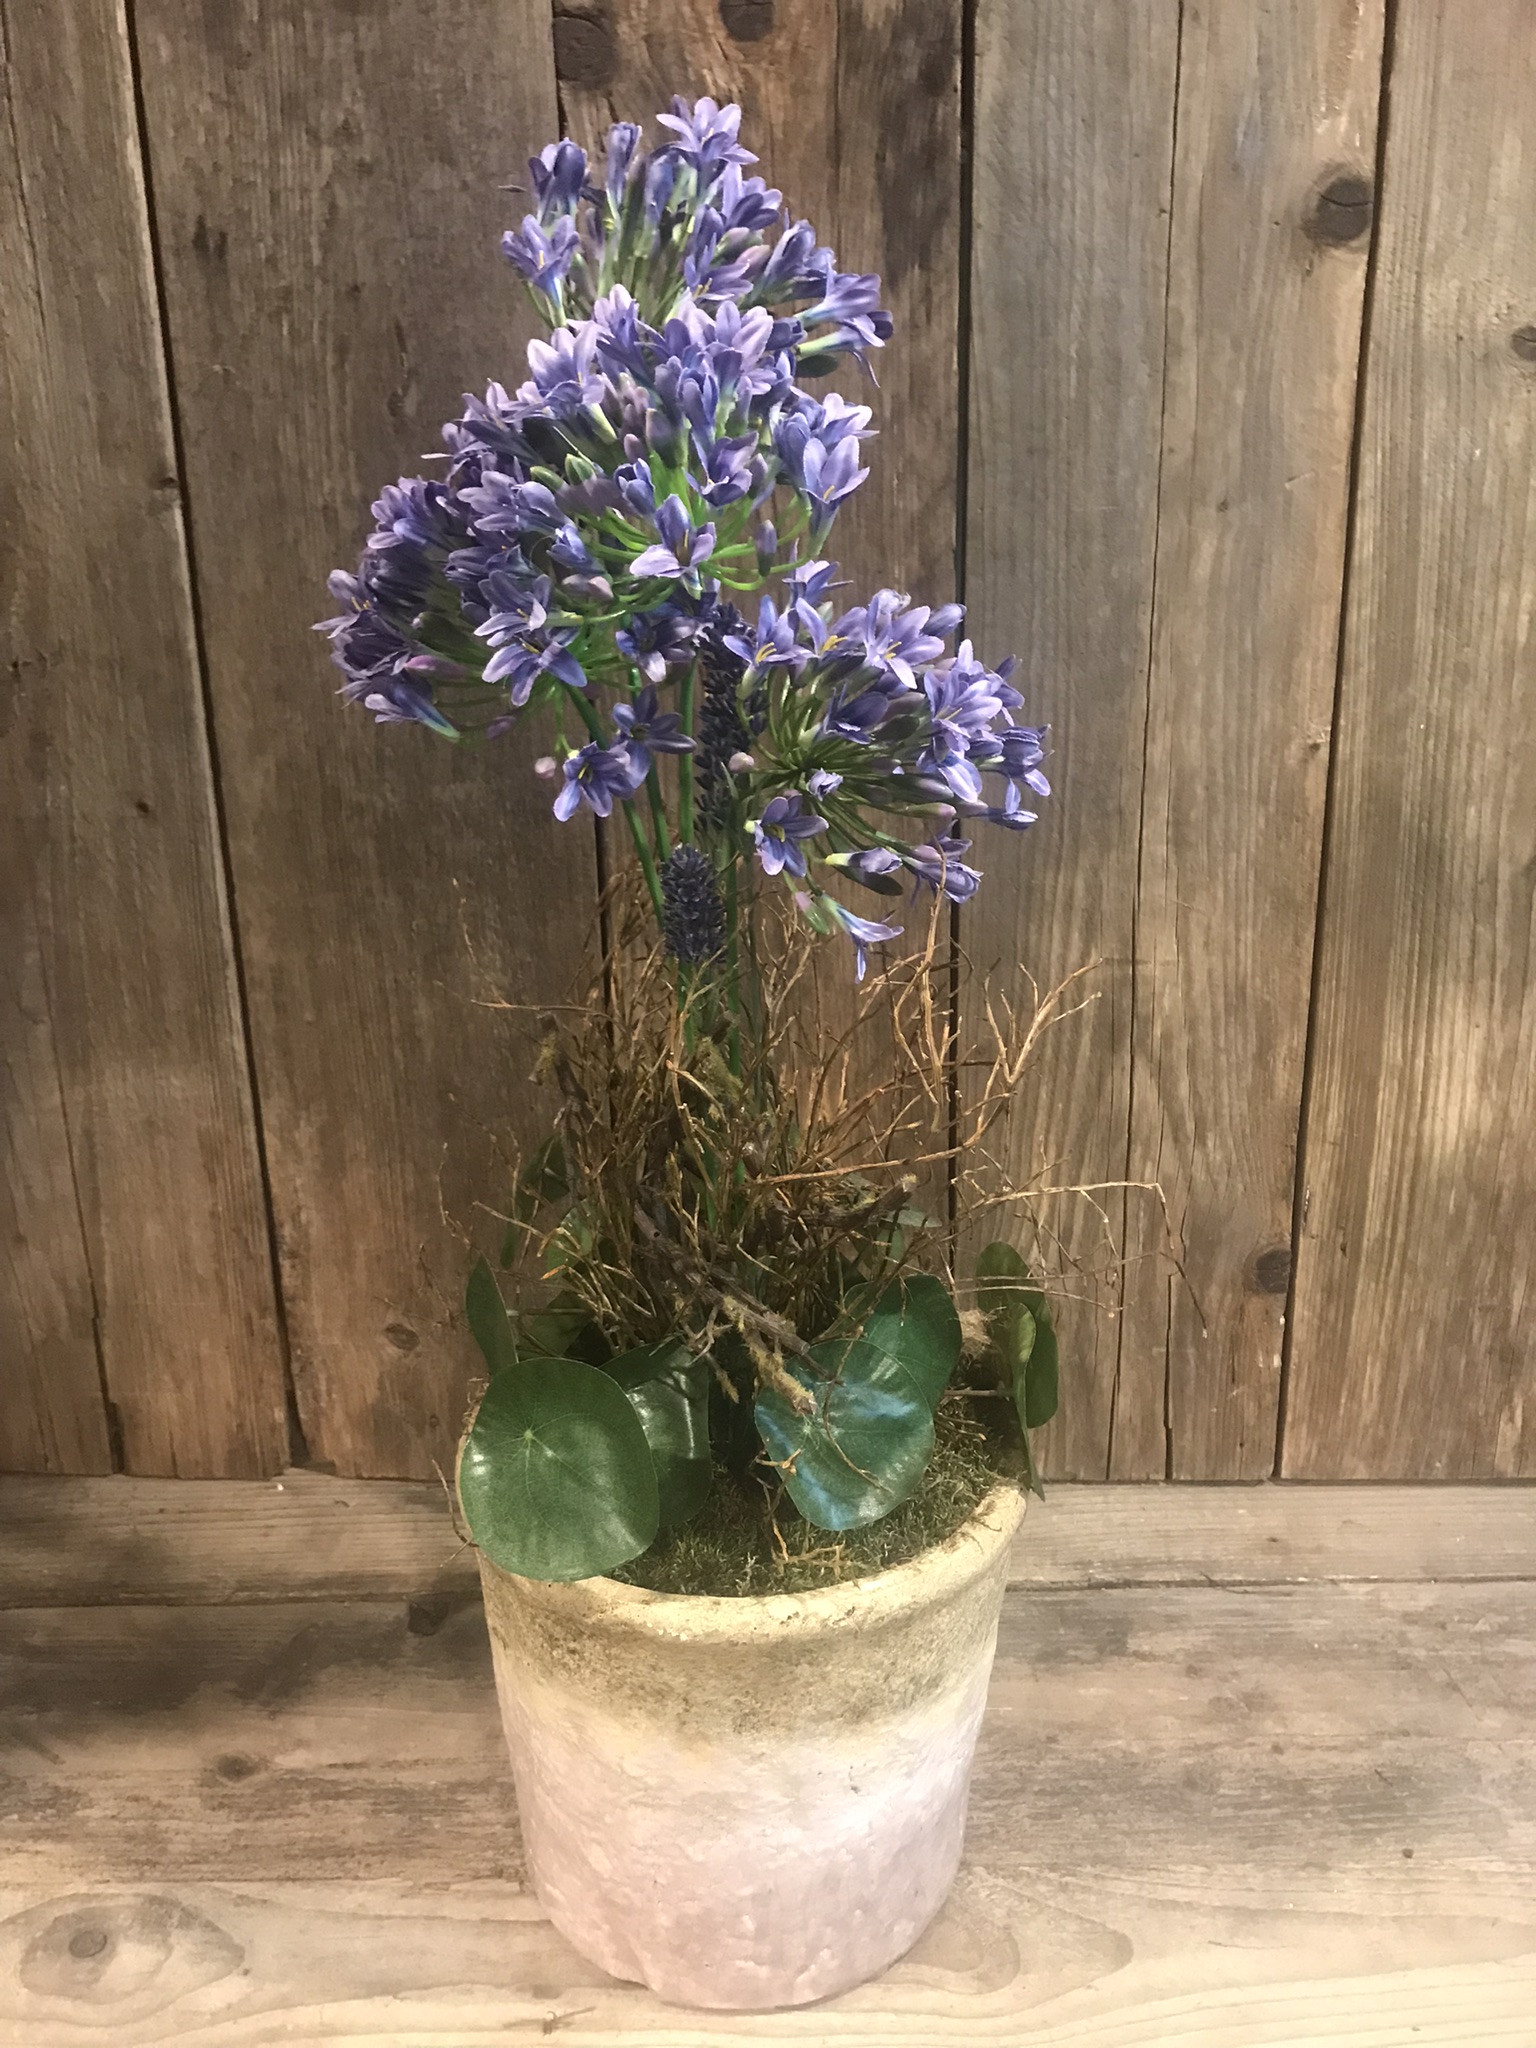 Agapanthus, Pilea peperomioides in pot